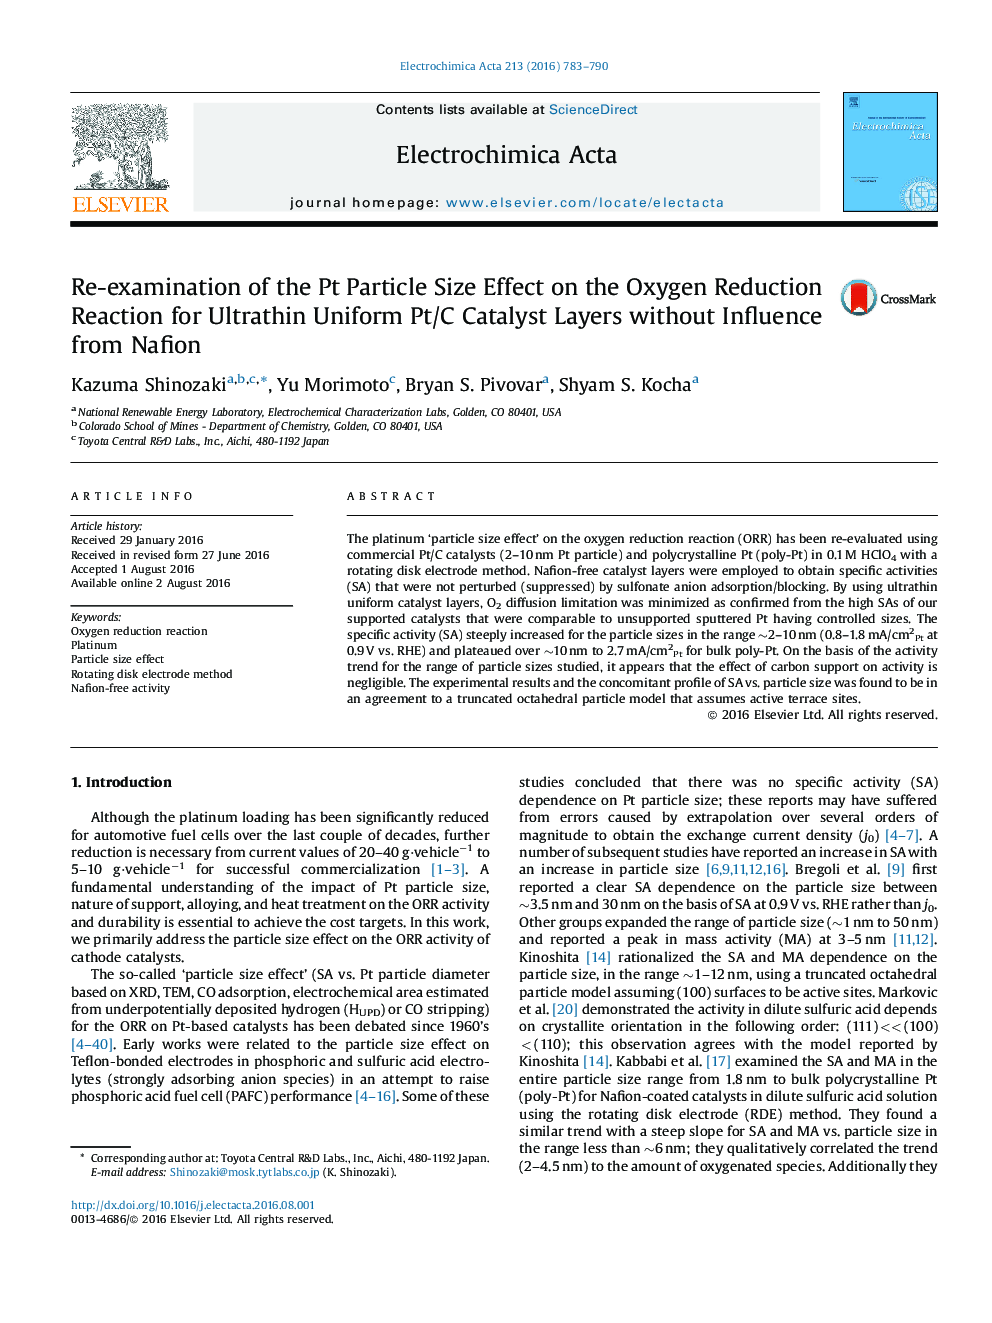 Re-examination of the Pt Particle Size Effect on the Oxygen Reduction Reaction for Ultrathin Uniform Pt/C Catalyst Layers without Influence from Nafion